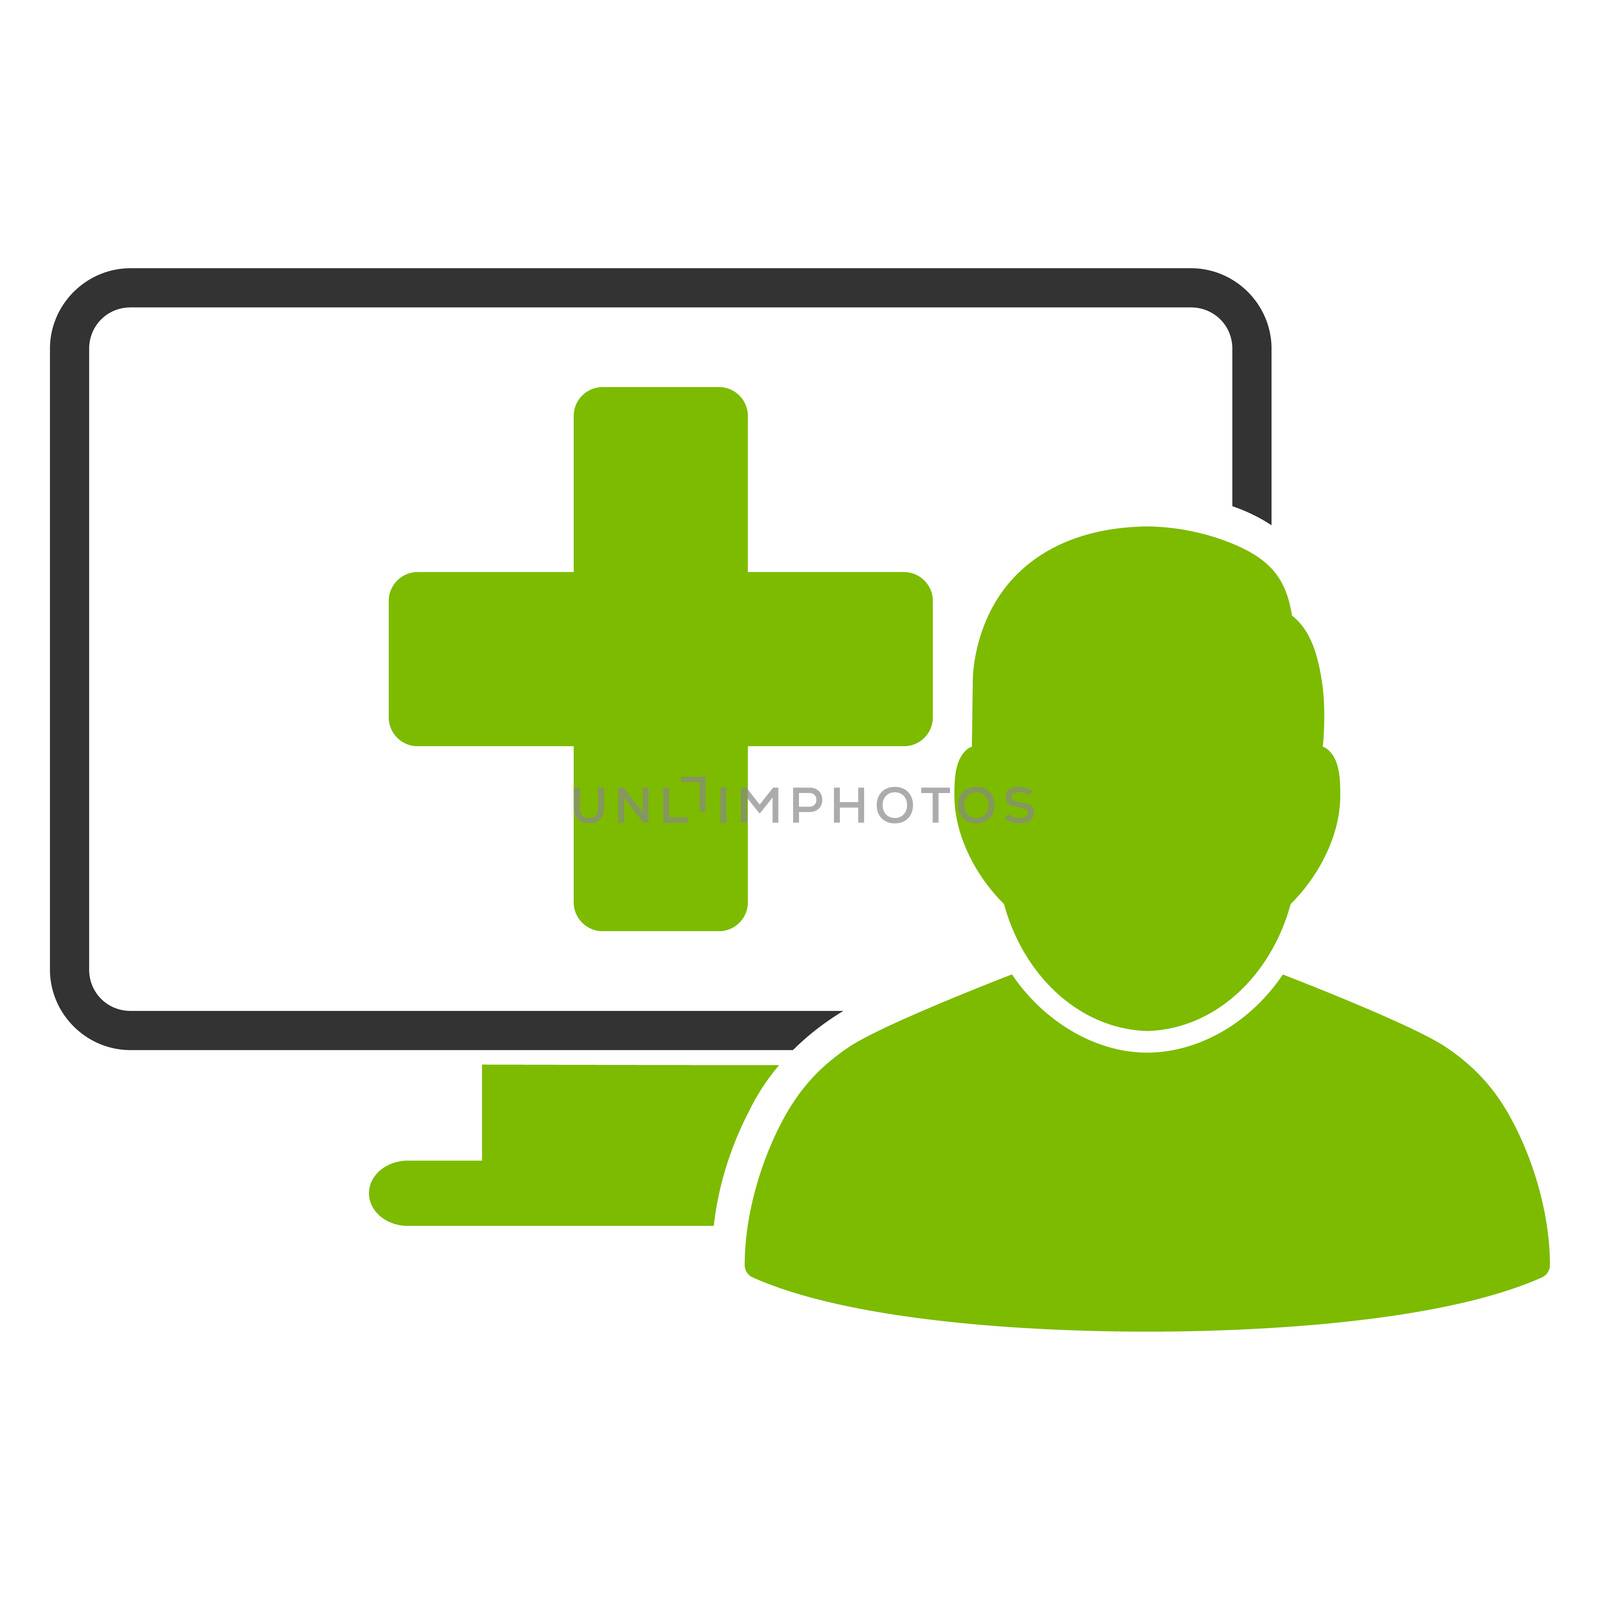 Online Medicine raster icon. Style is bicolor flat symbol, eco green and gray colors, rounded angles, white background.